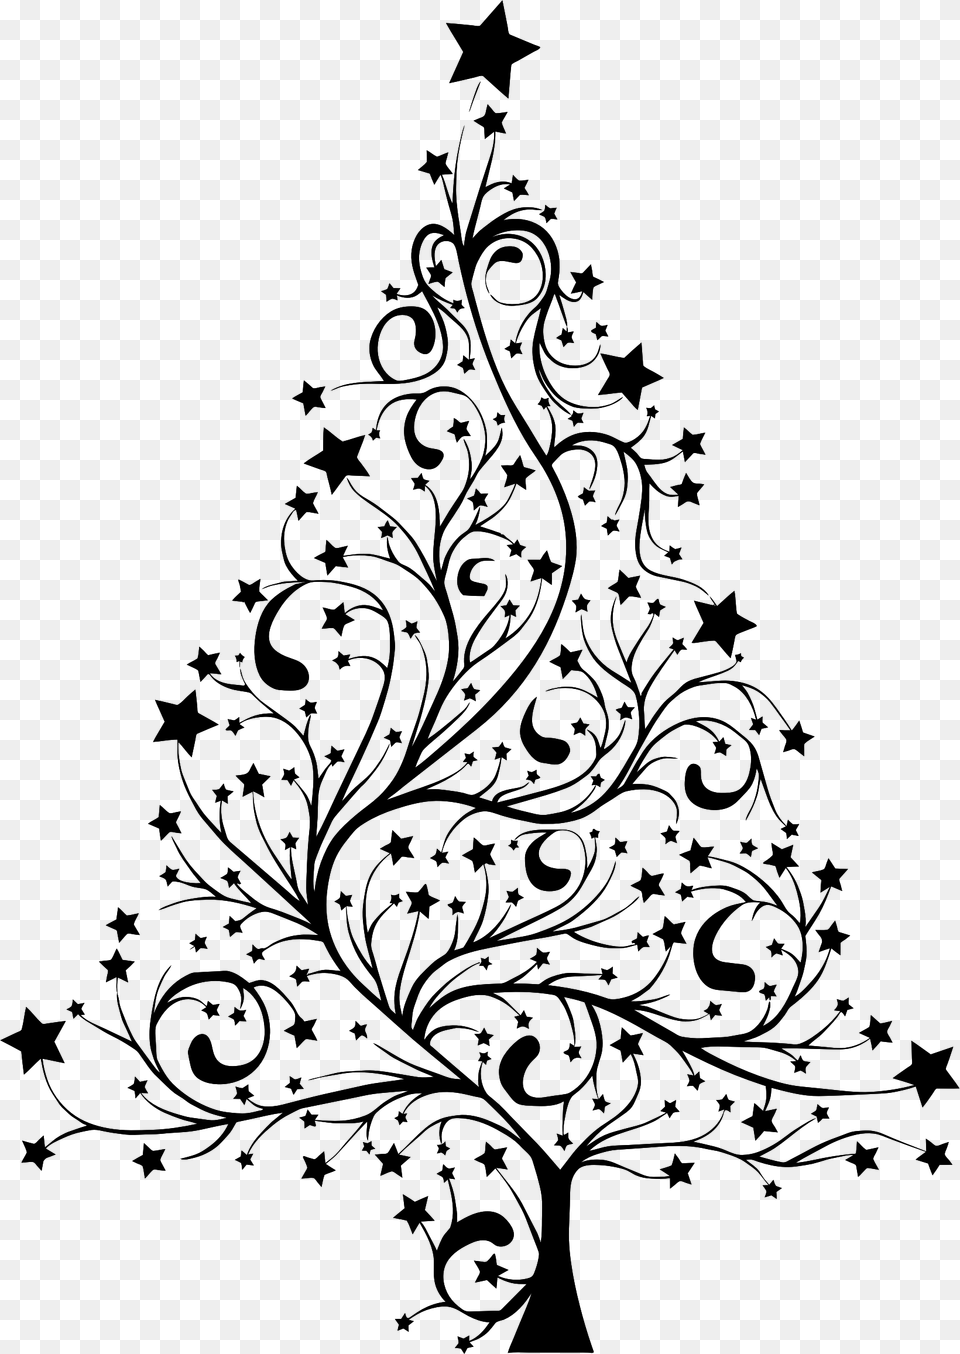 Christmas Tree Black And White Svg Royalty Stock Christmas Tree Silhouette, Gray Free Png